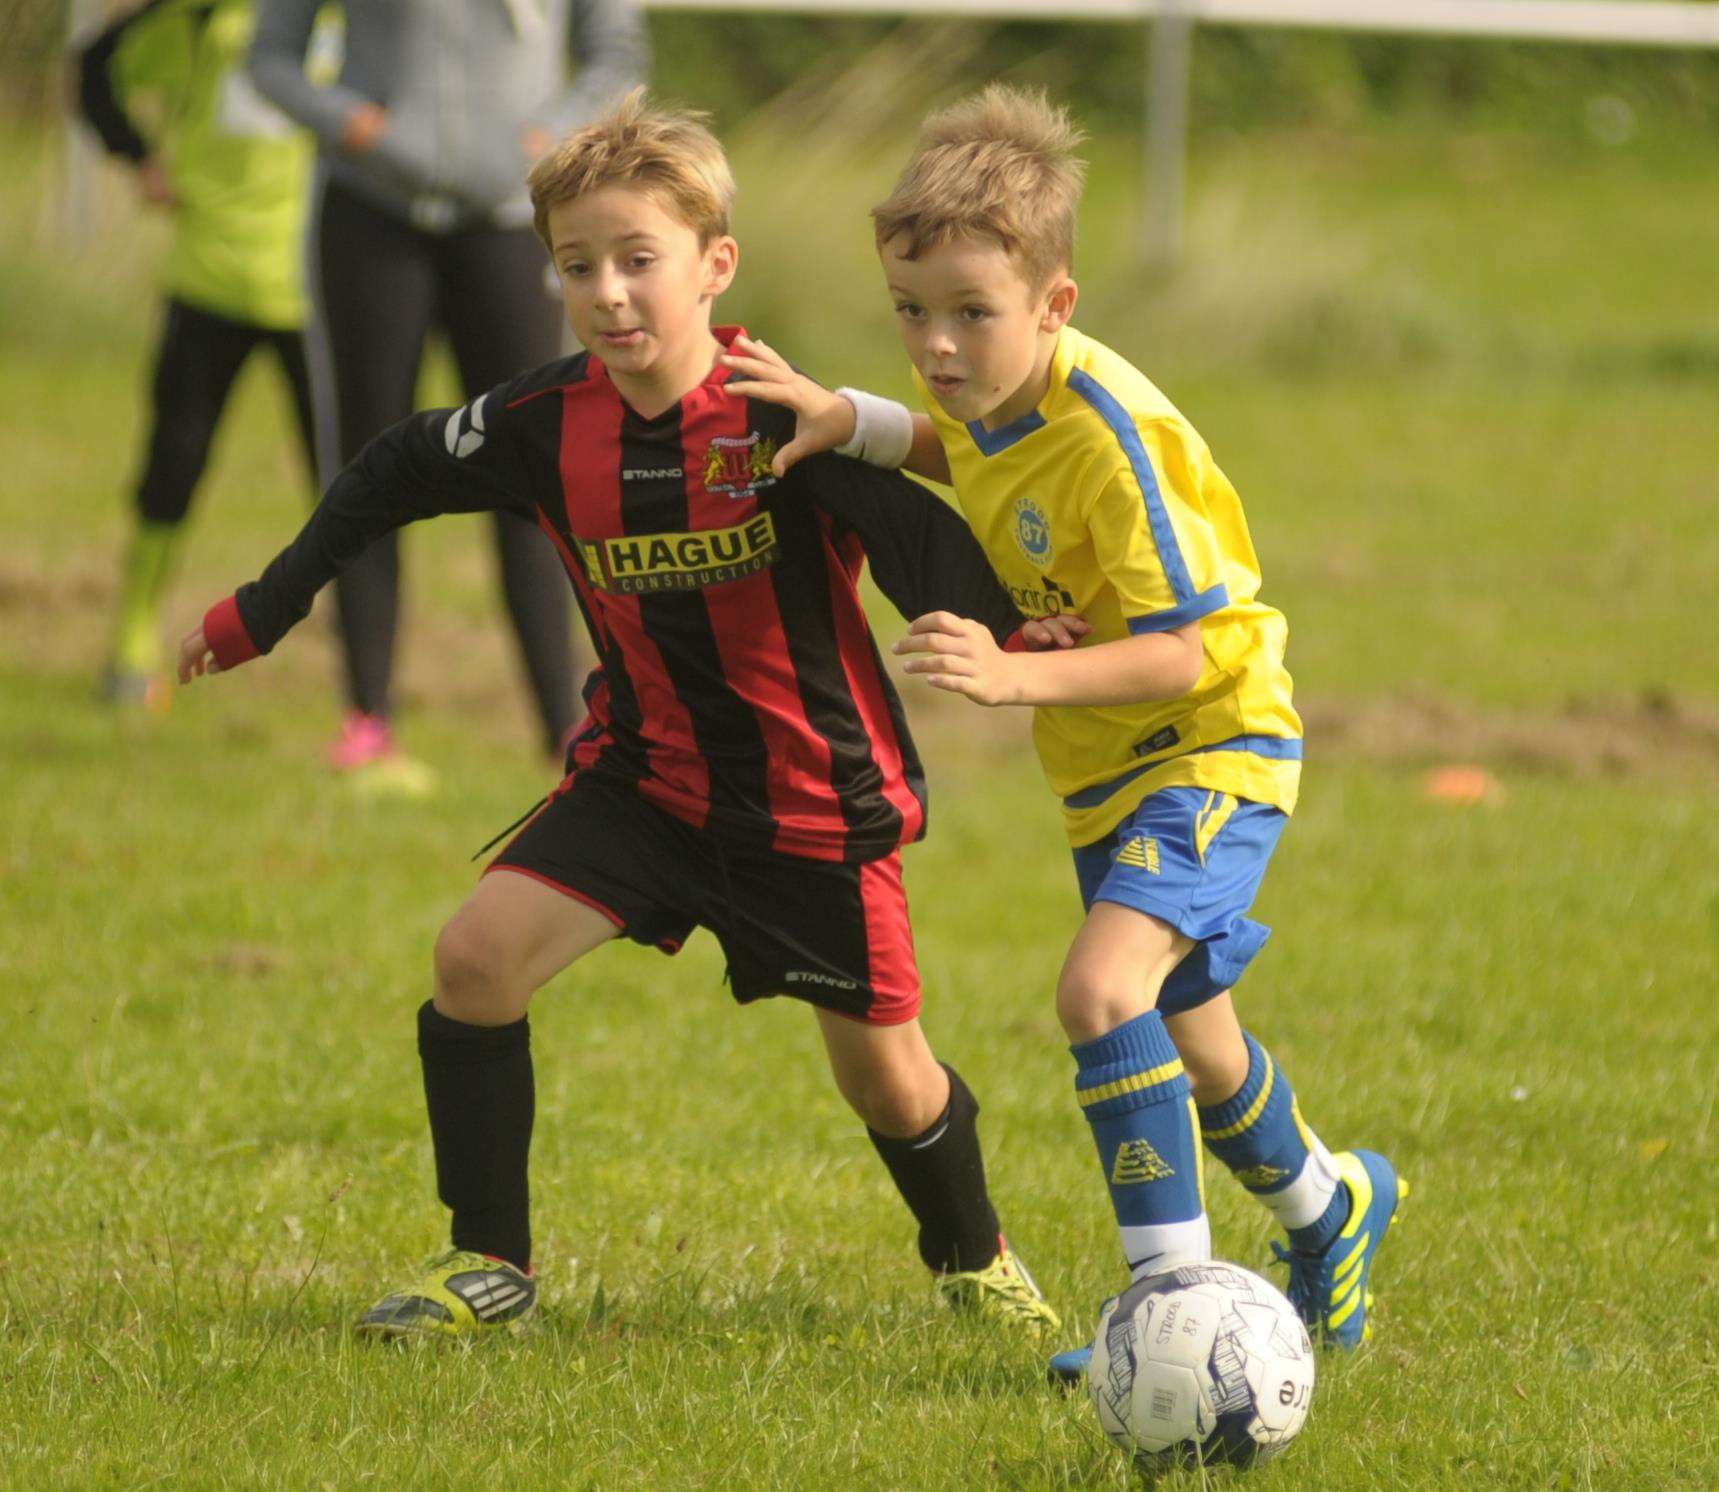 Strood 87 under-8s take on Woodcoombe Youth Picture: Steve Crispe